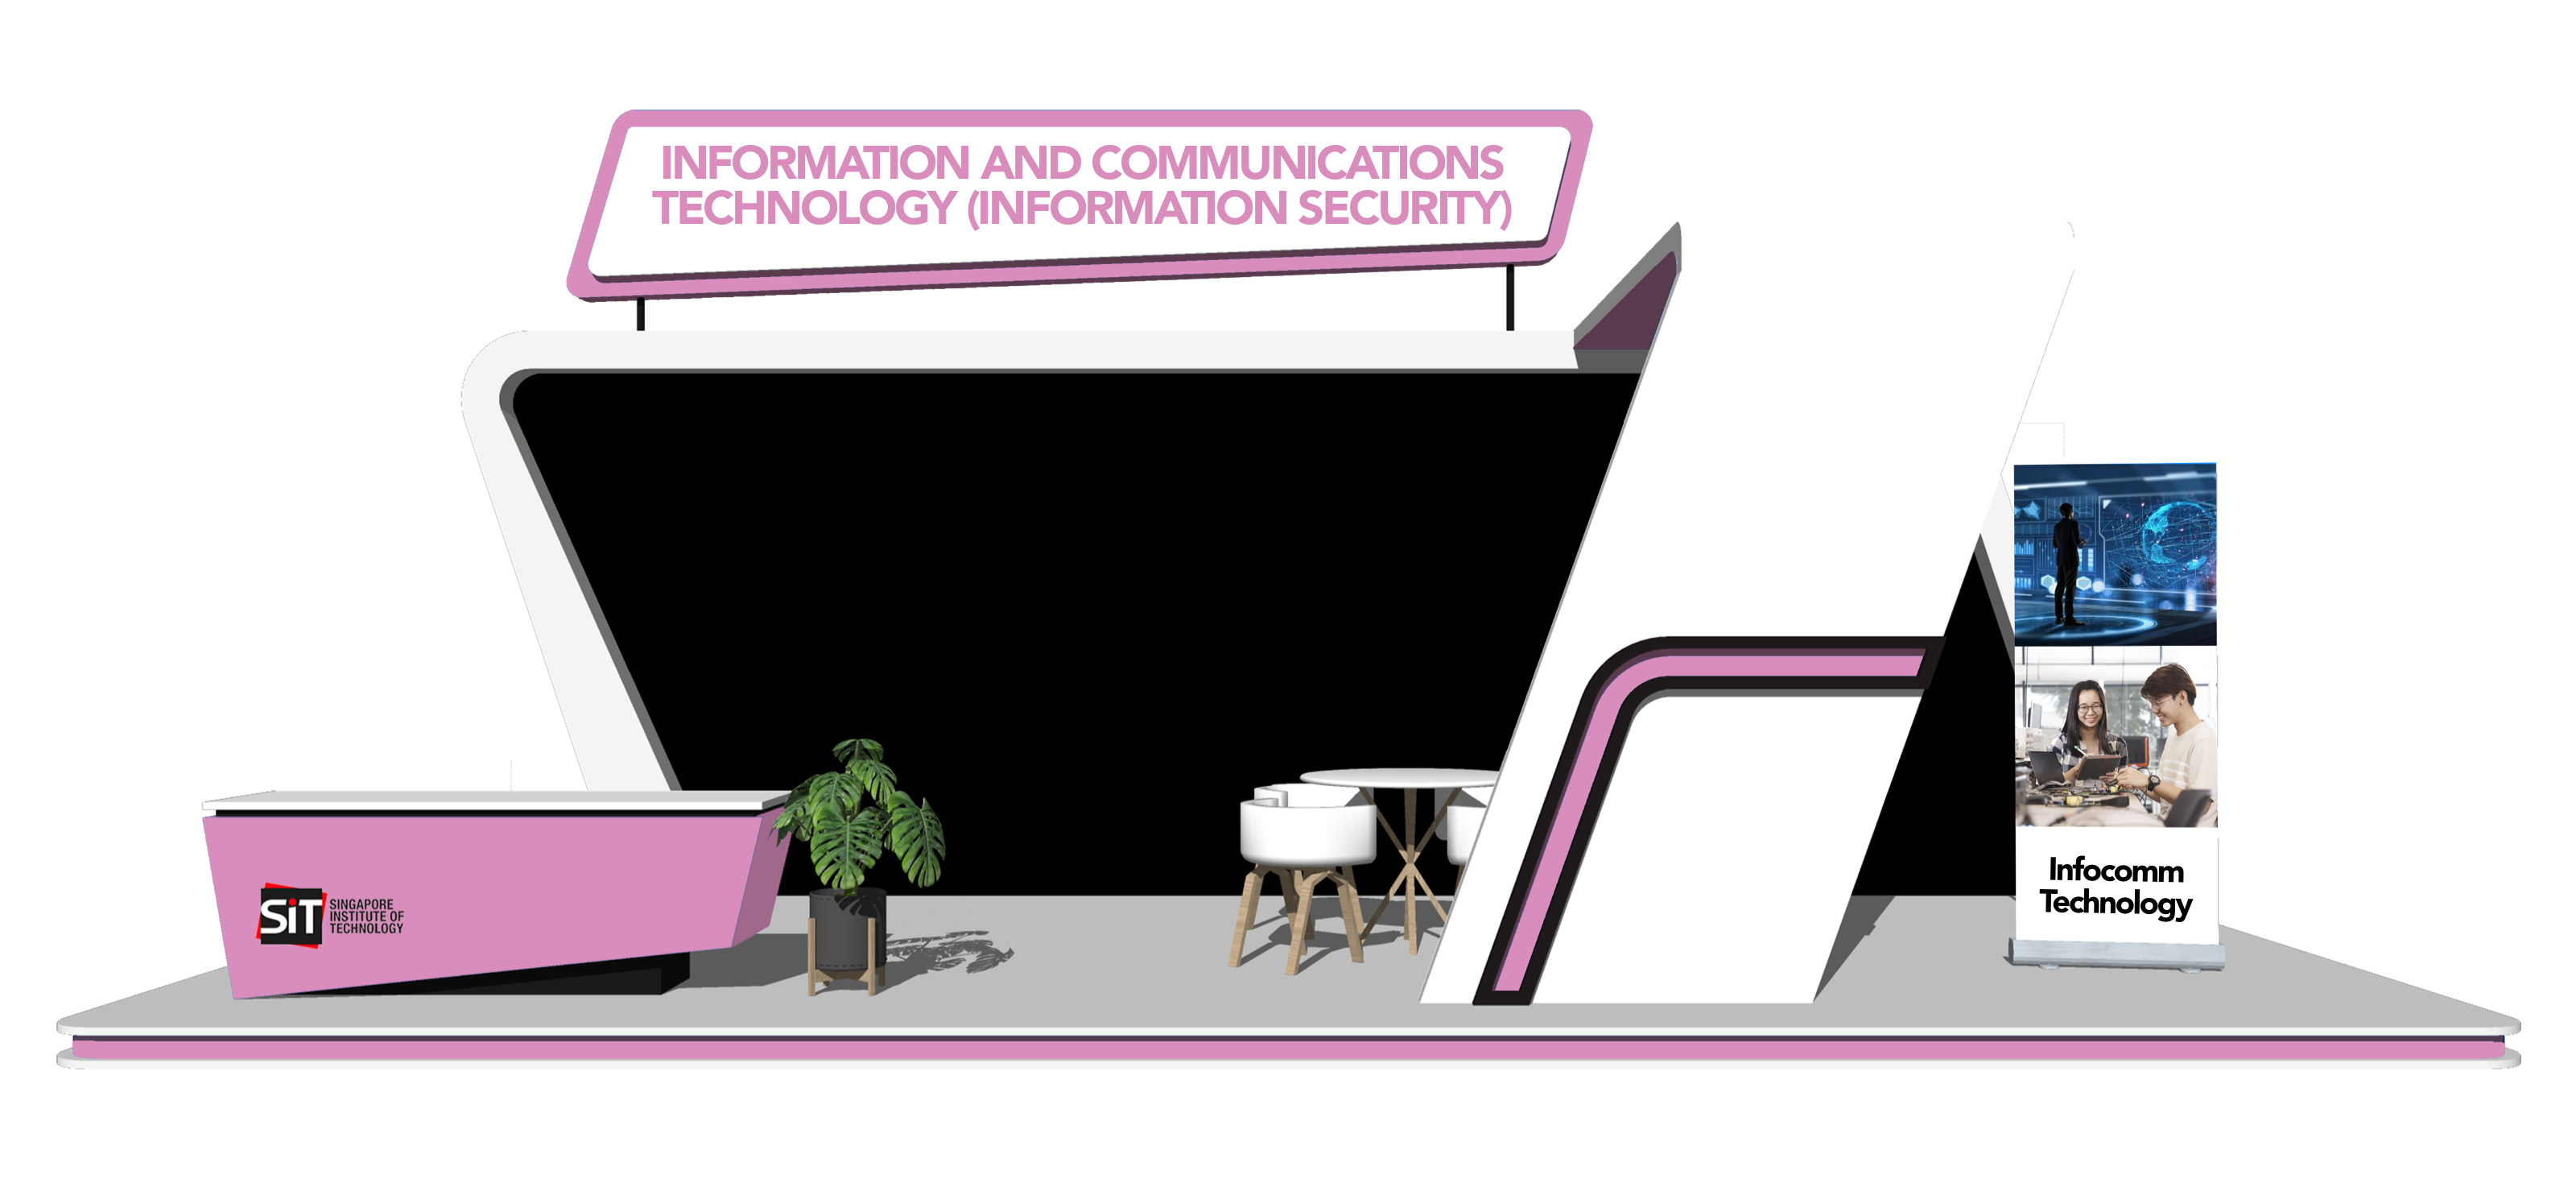 Information and Communications Technology (Information Security)